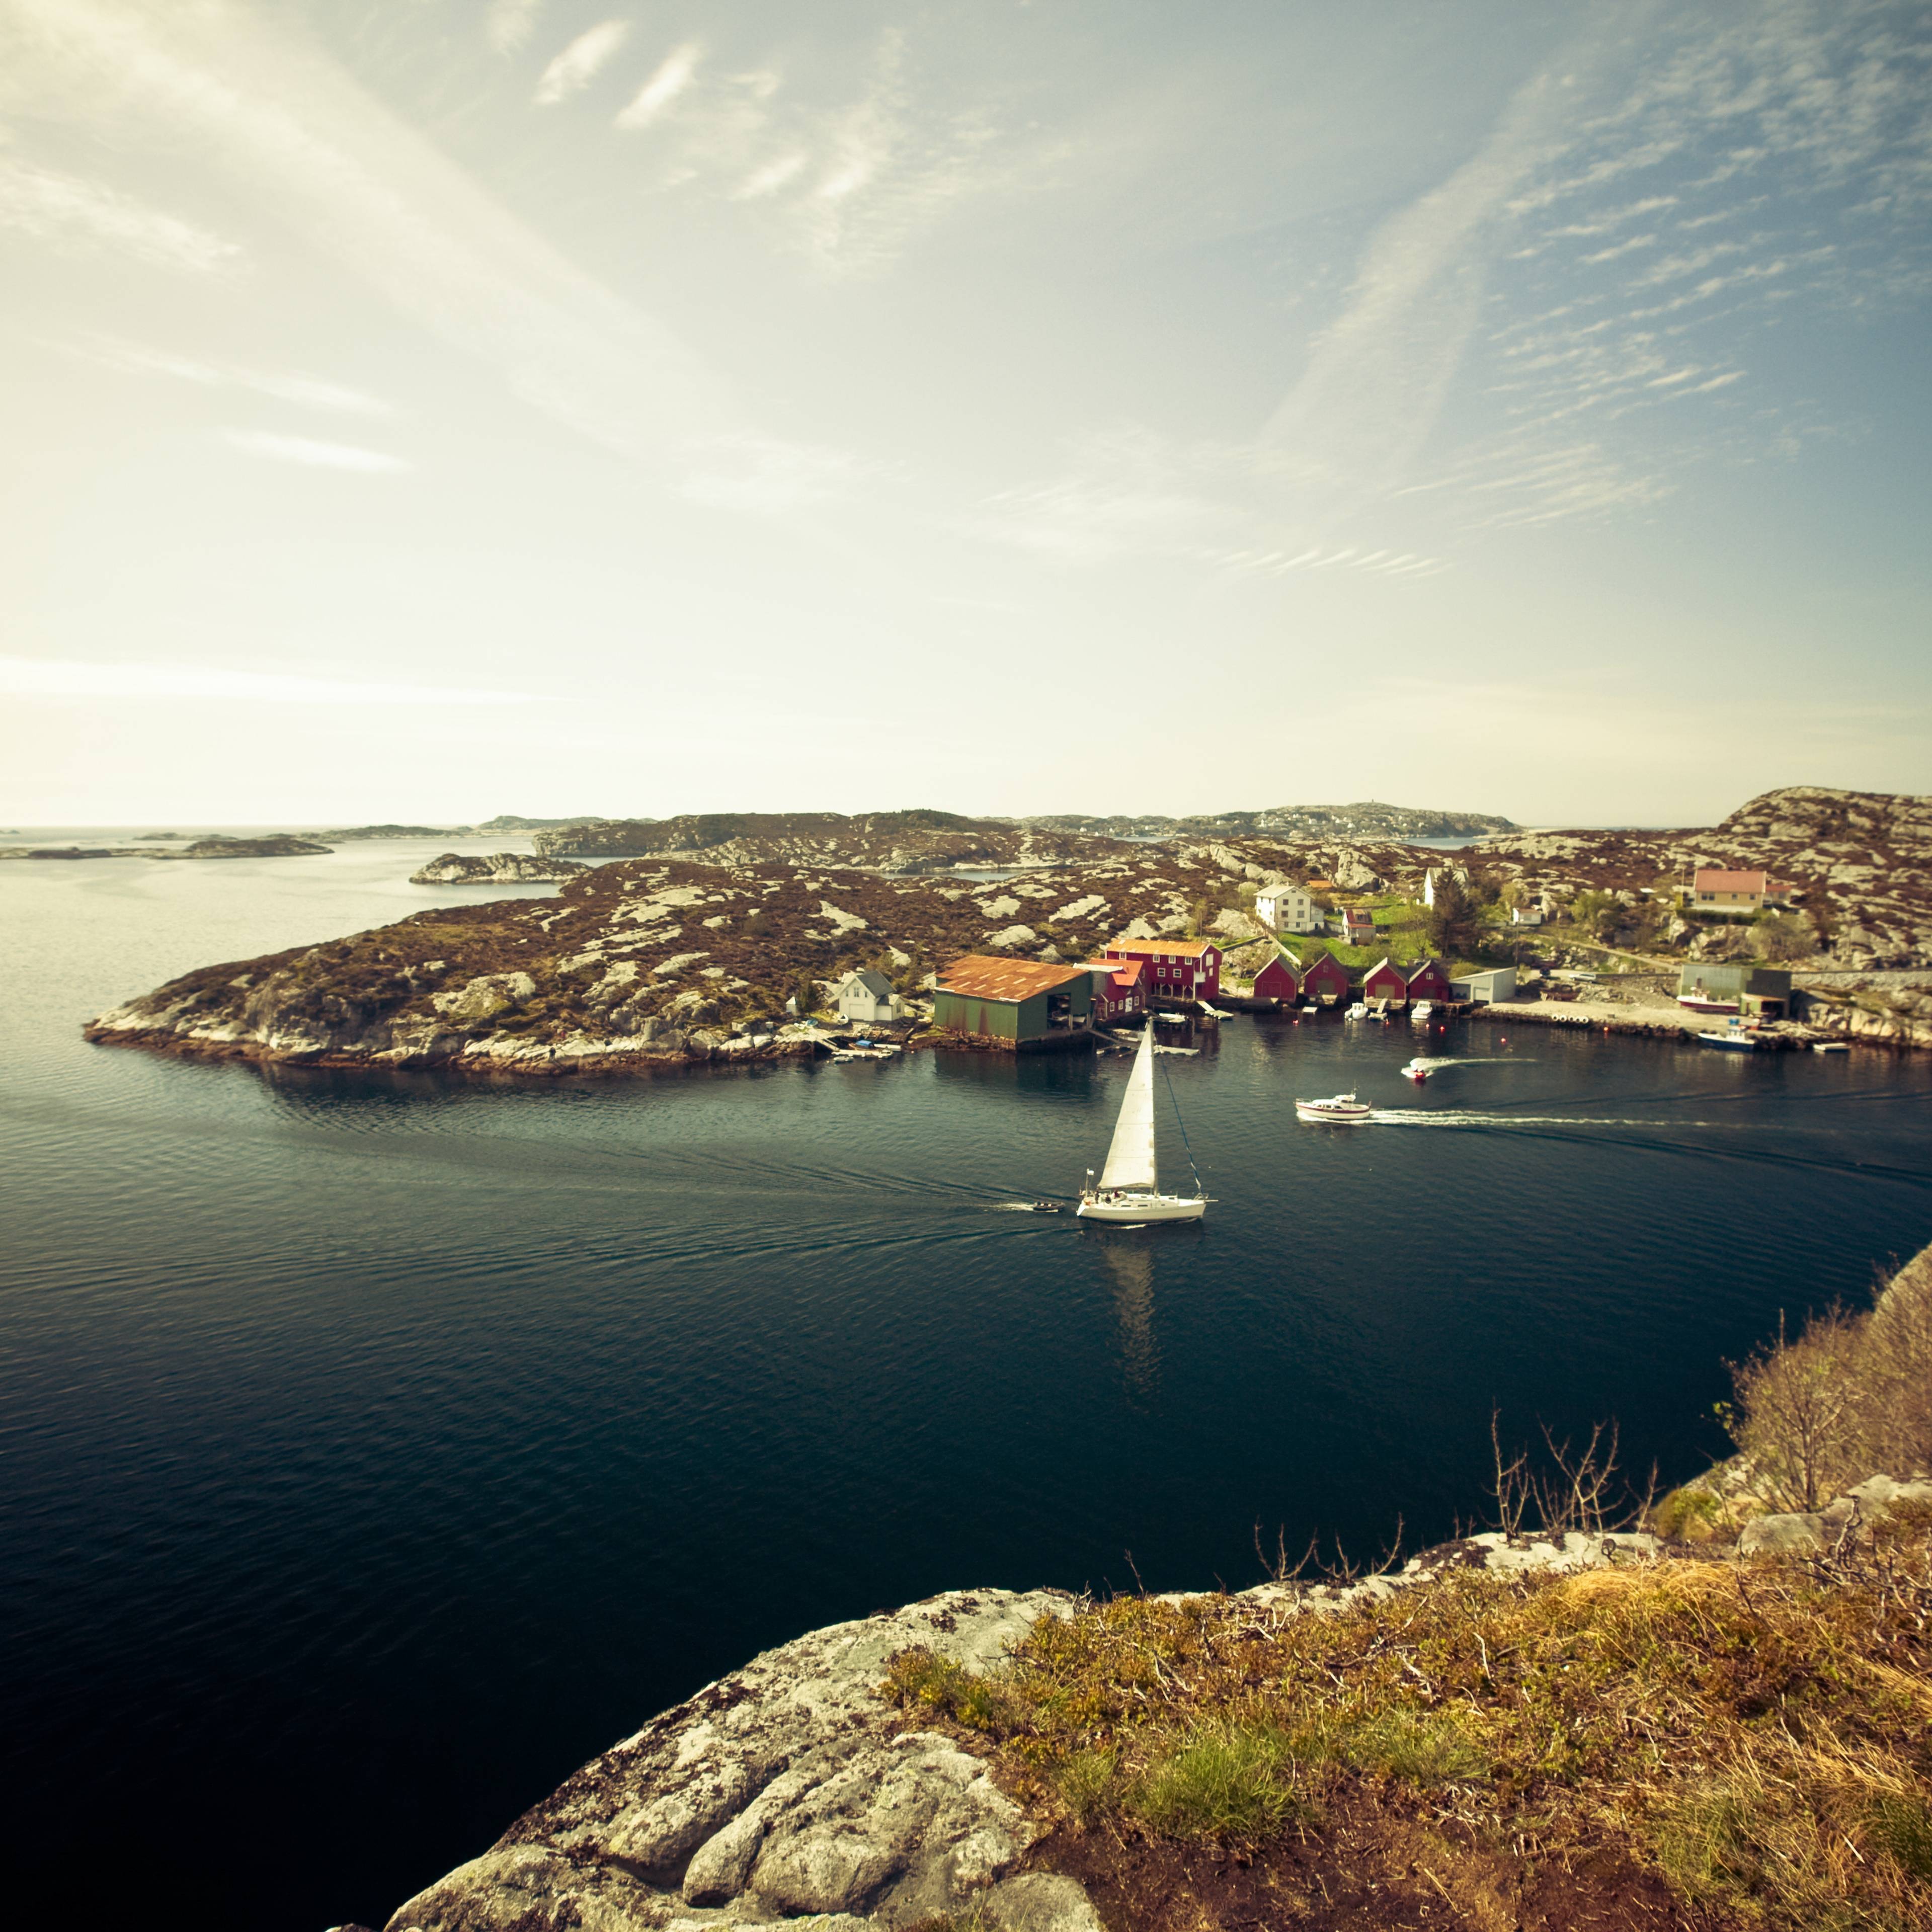 A Day Trip to the South of Bergen and Sotra Island